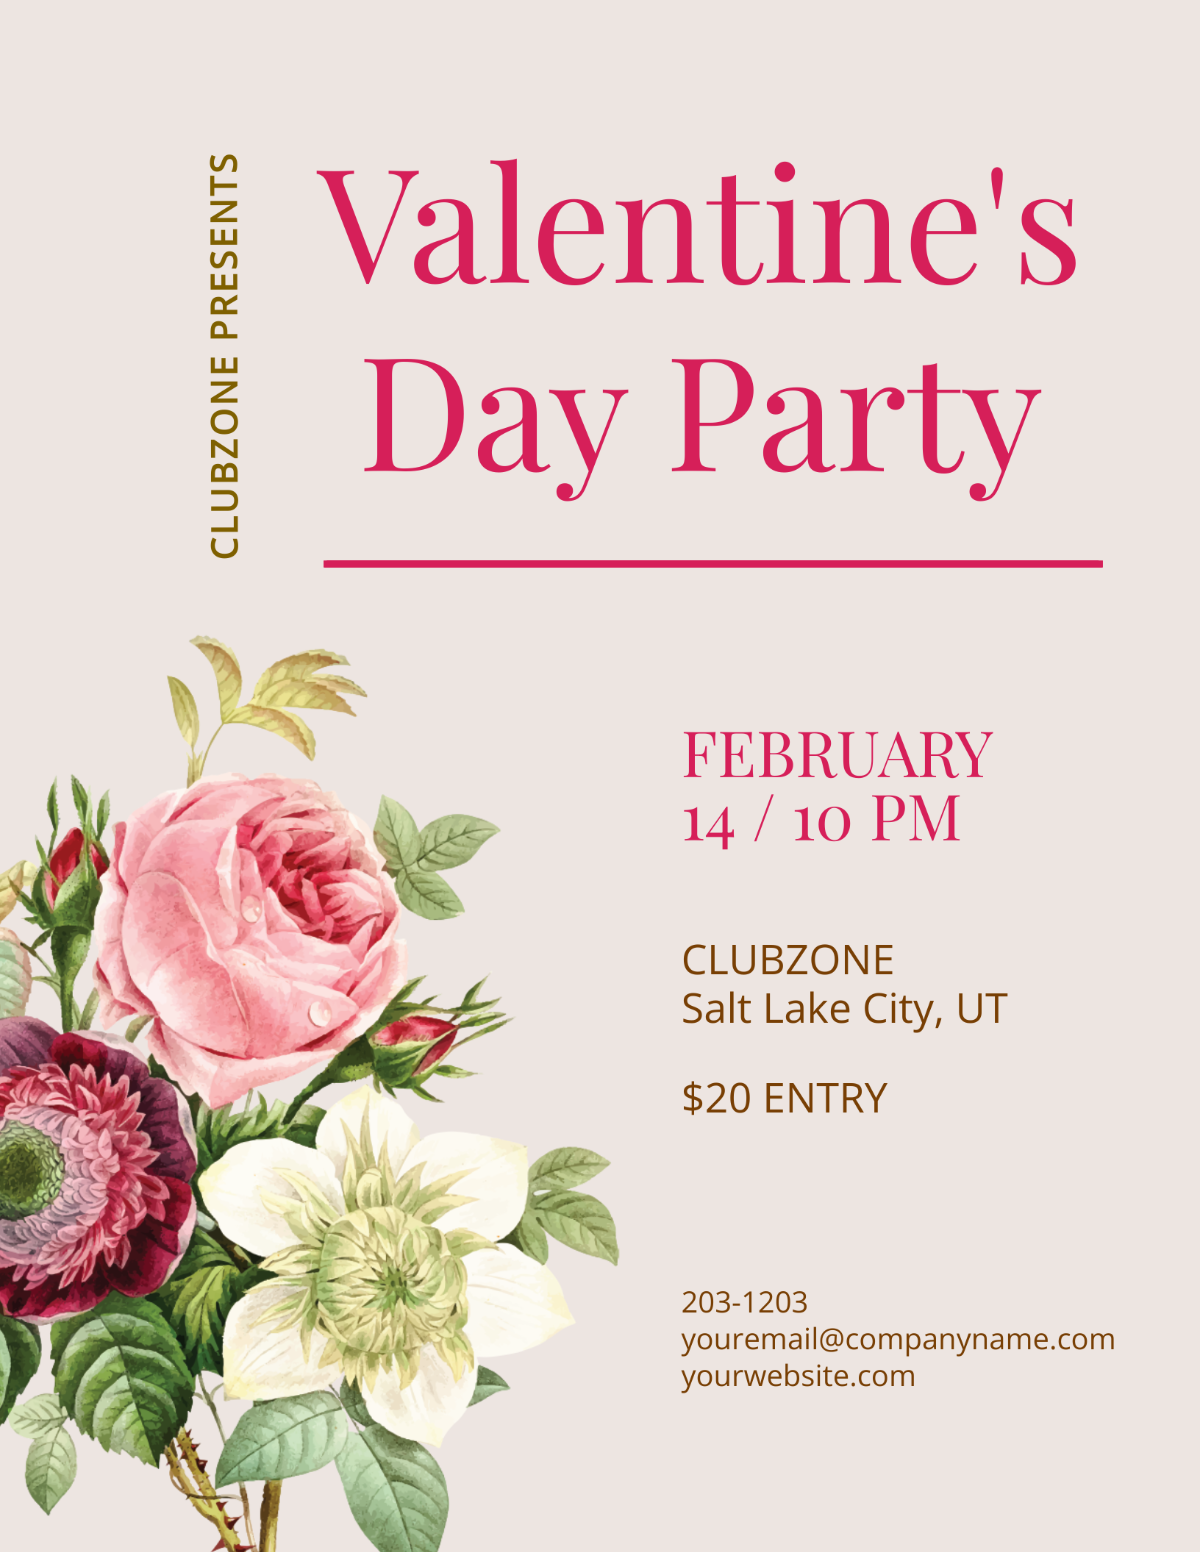 Valentines Event Flyer Template